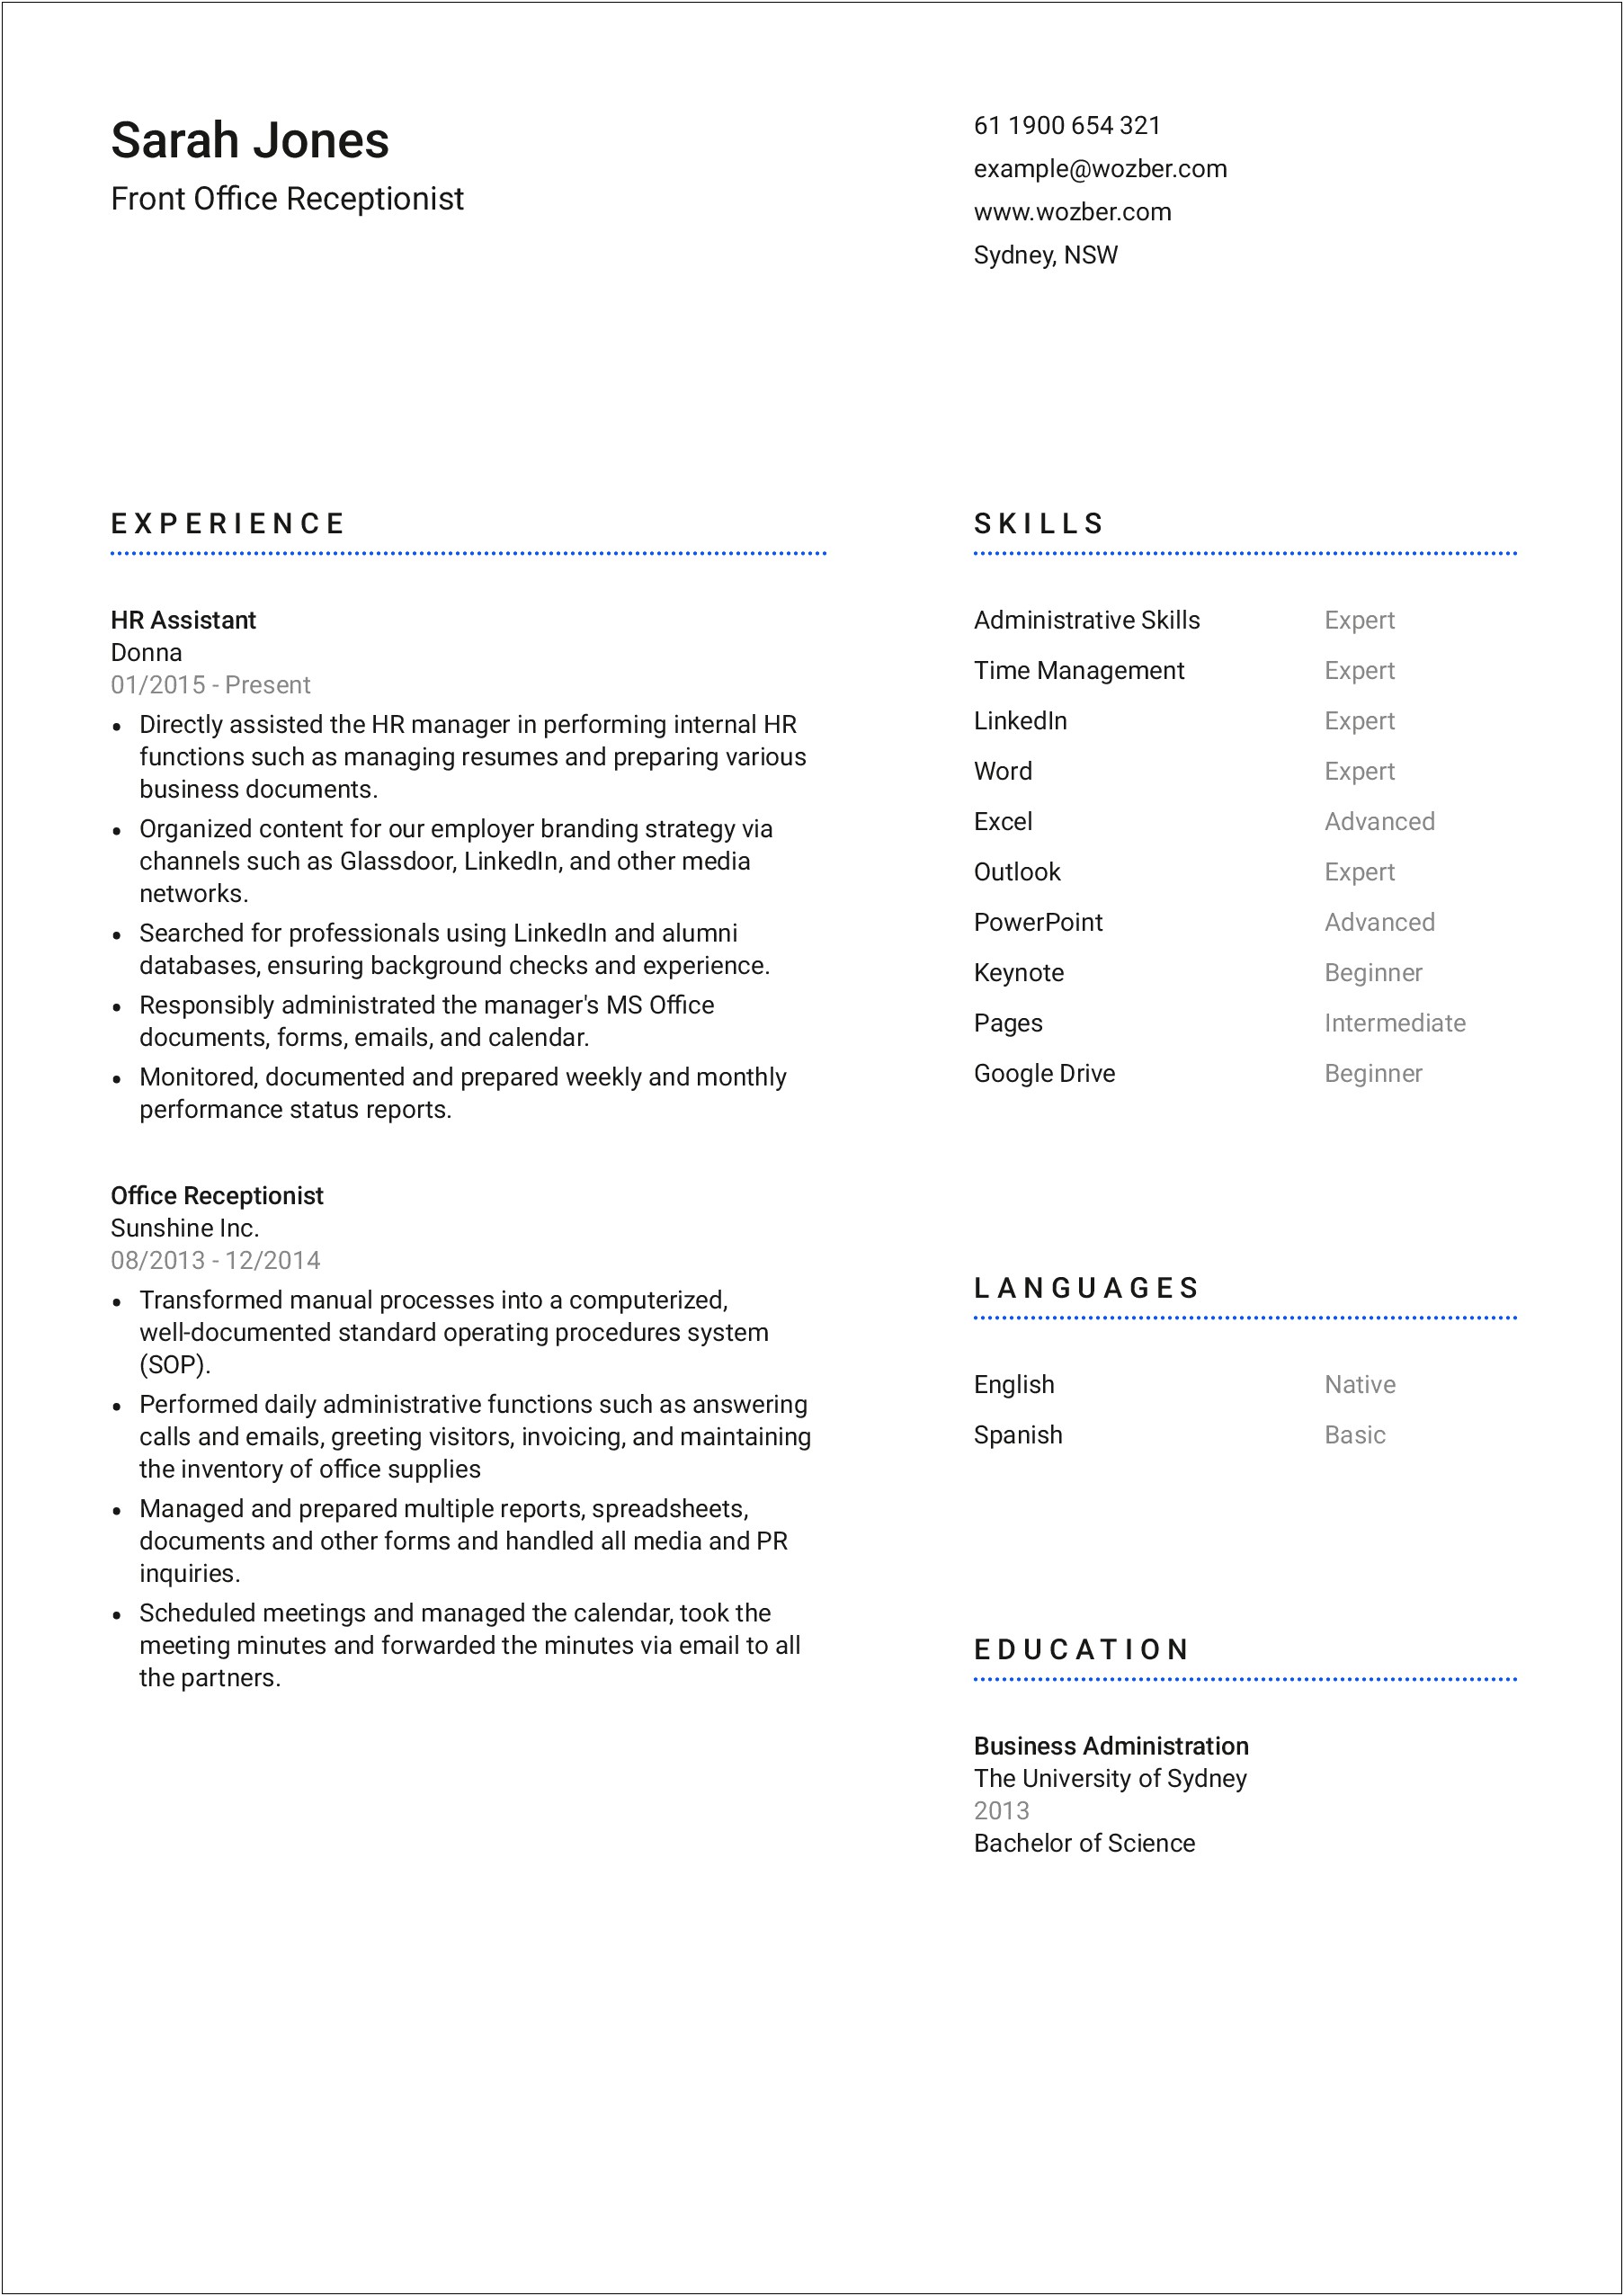 Resume Objective Examples For Future Pa